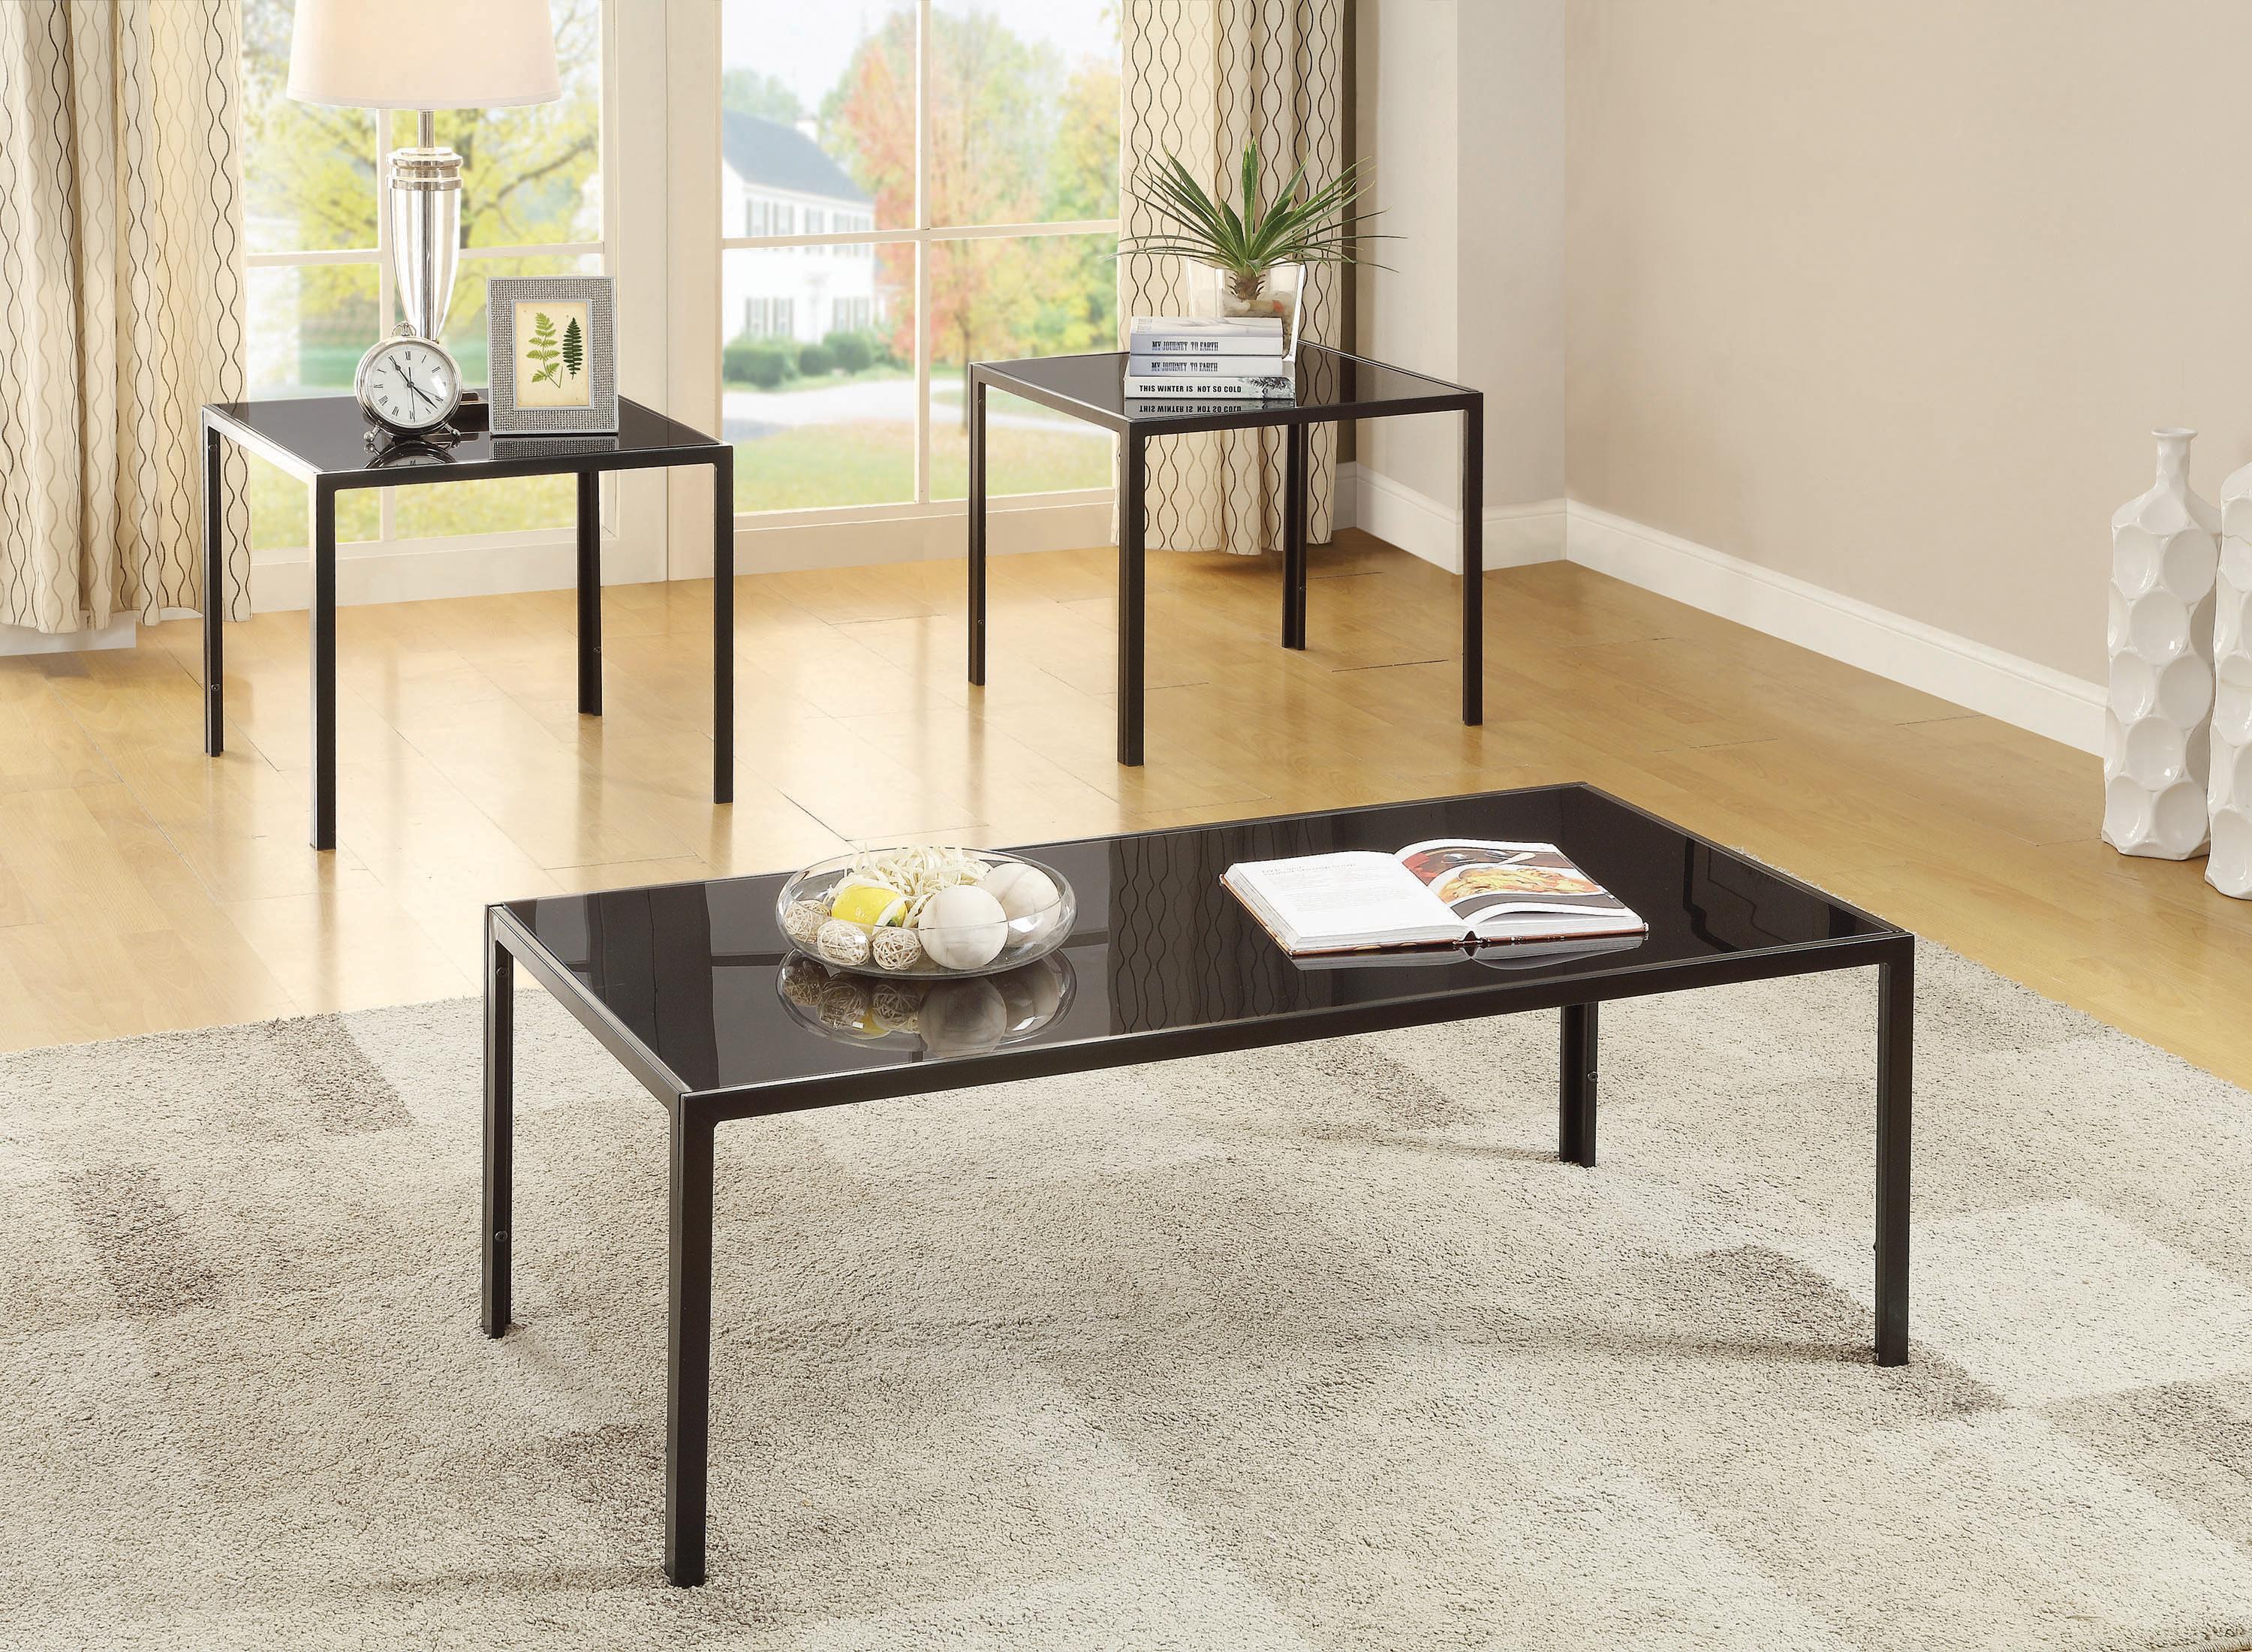 Contemporary Coffee Table Set 720457 720457 in Brown 